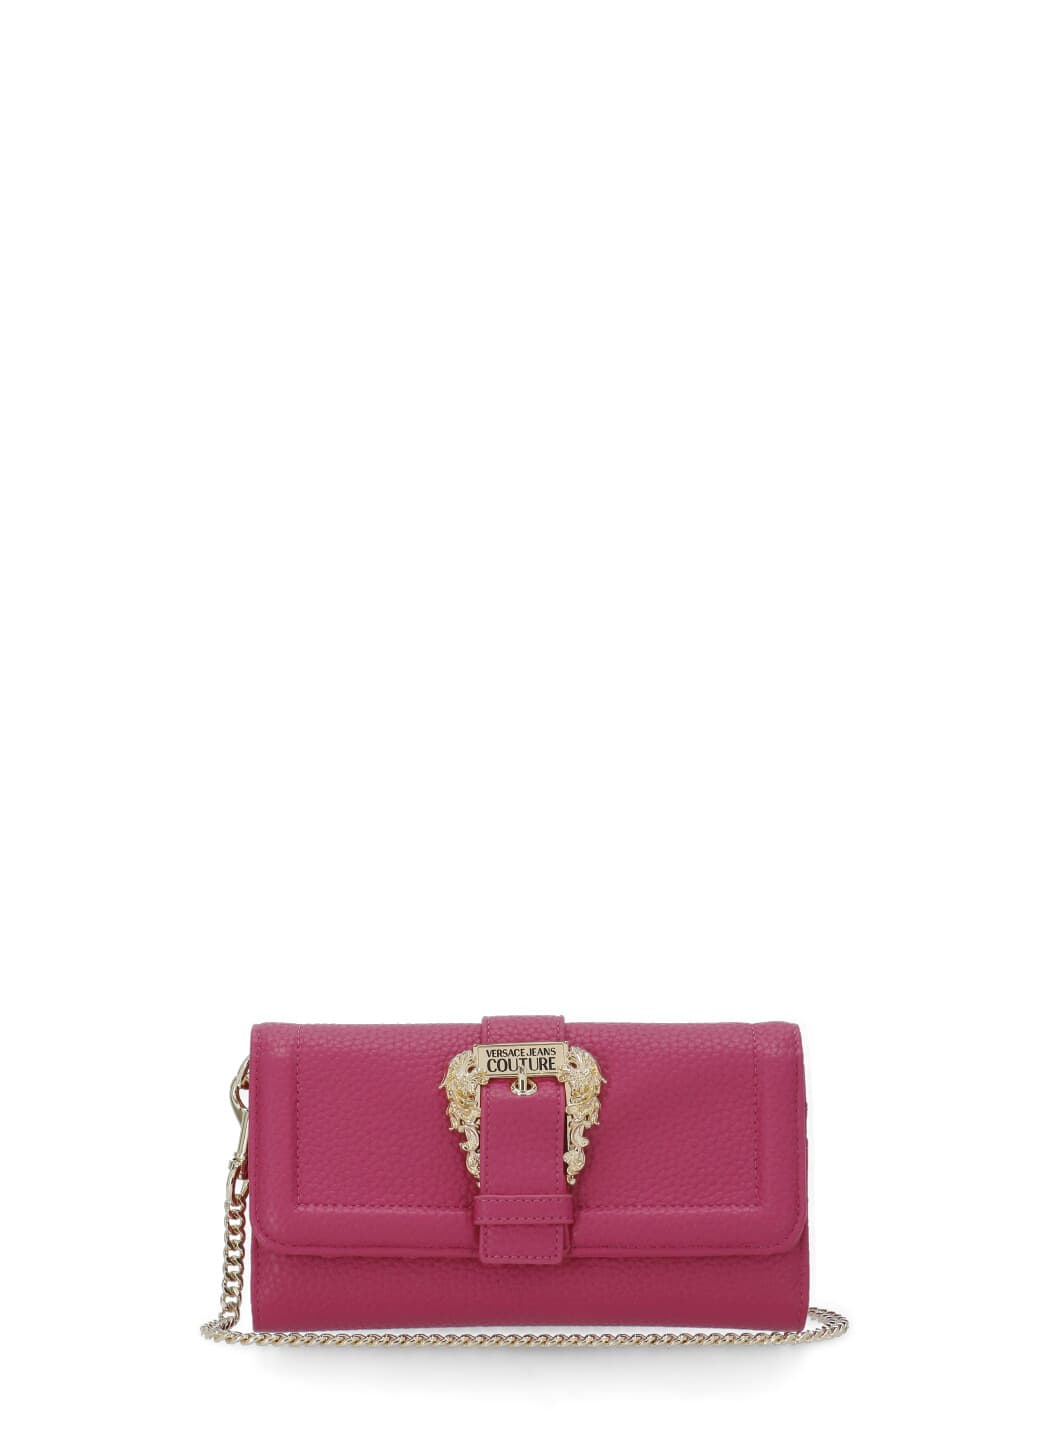 Versace Jeans Couture Wallet With Logo In Pink